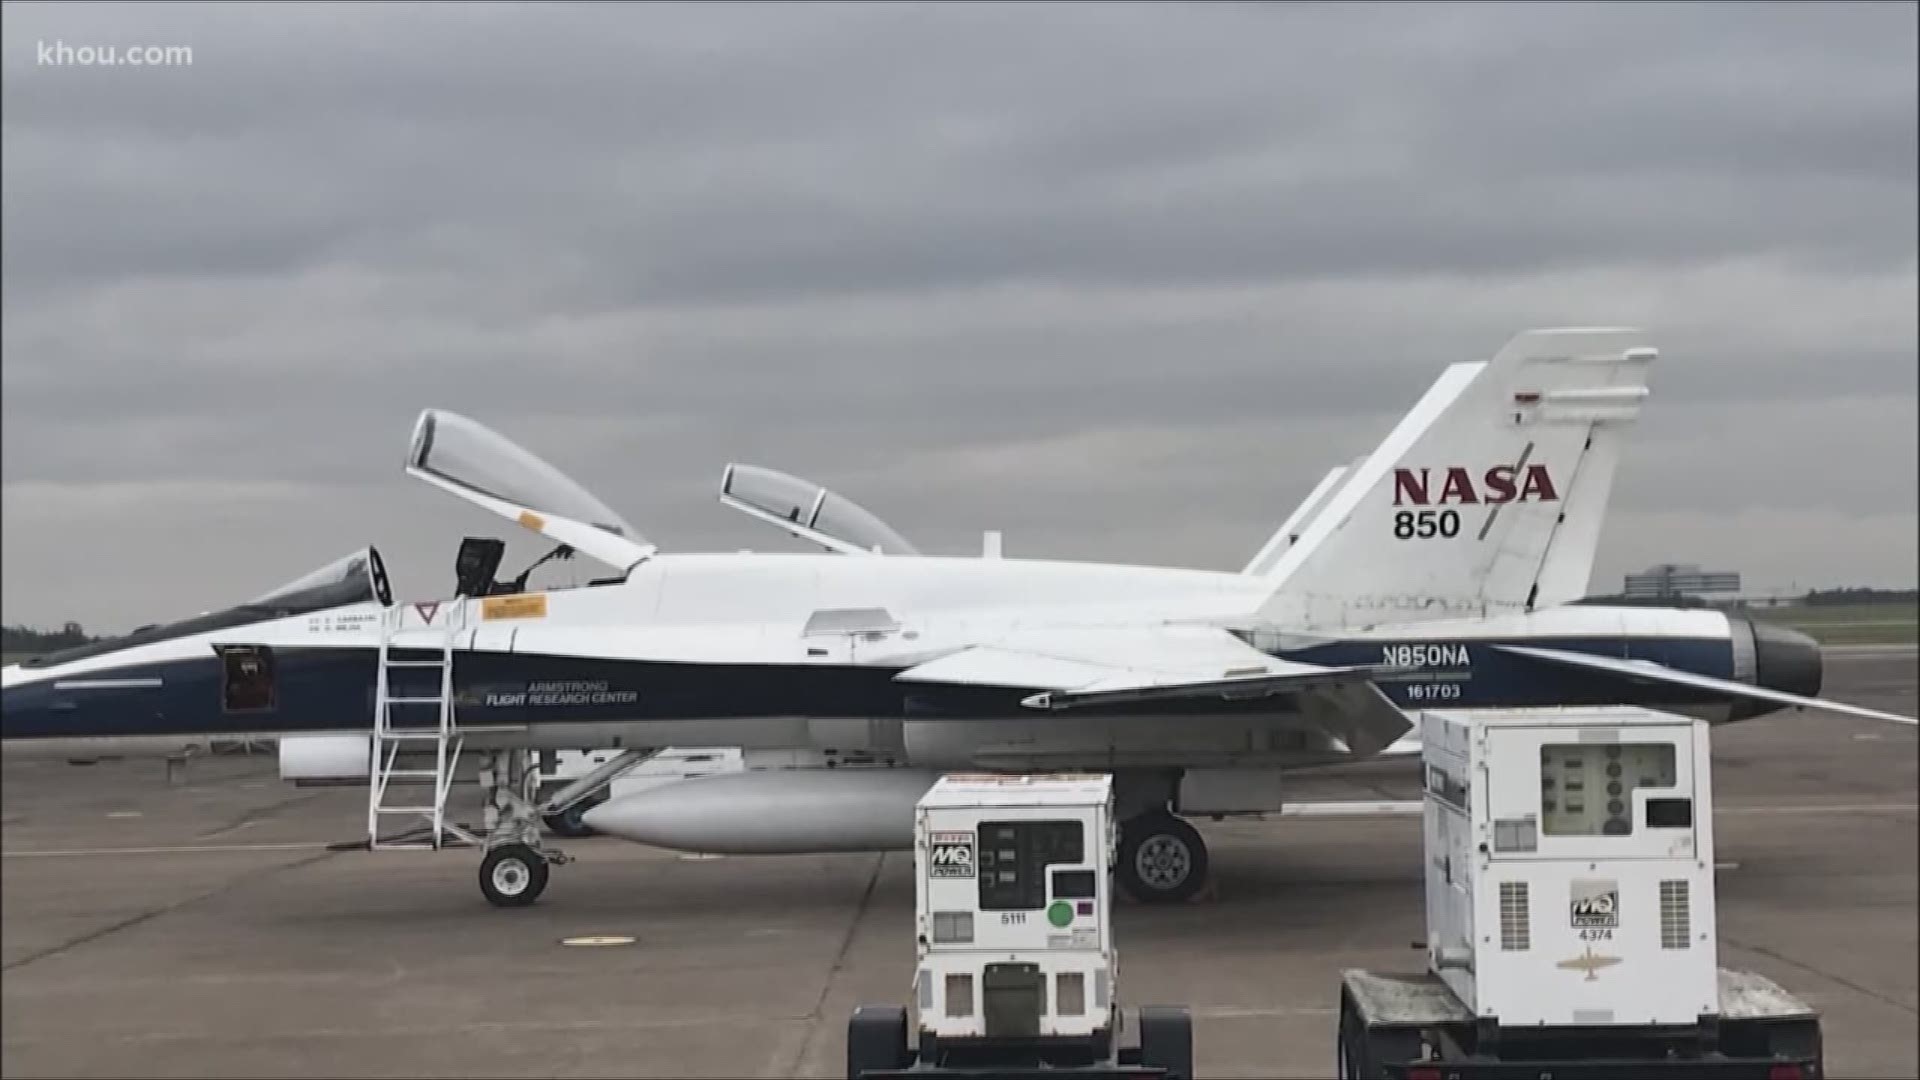 NASA's ongoing research into making sonic booms quieter continues this week. Jets will be flying over Galveston and creating "thumps" or muffled sonic booms. The goal is to help develop quieter supersonic air travel in the near future.